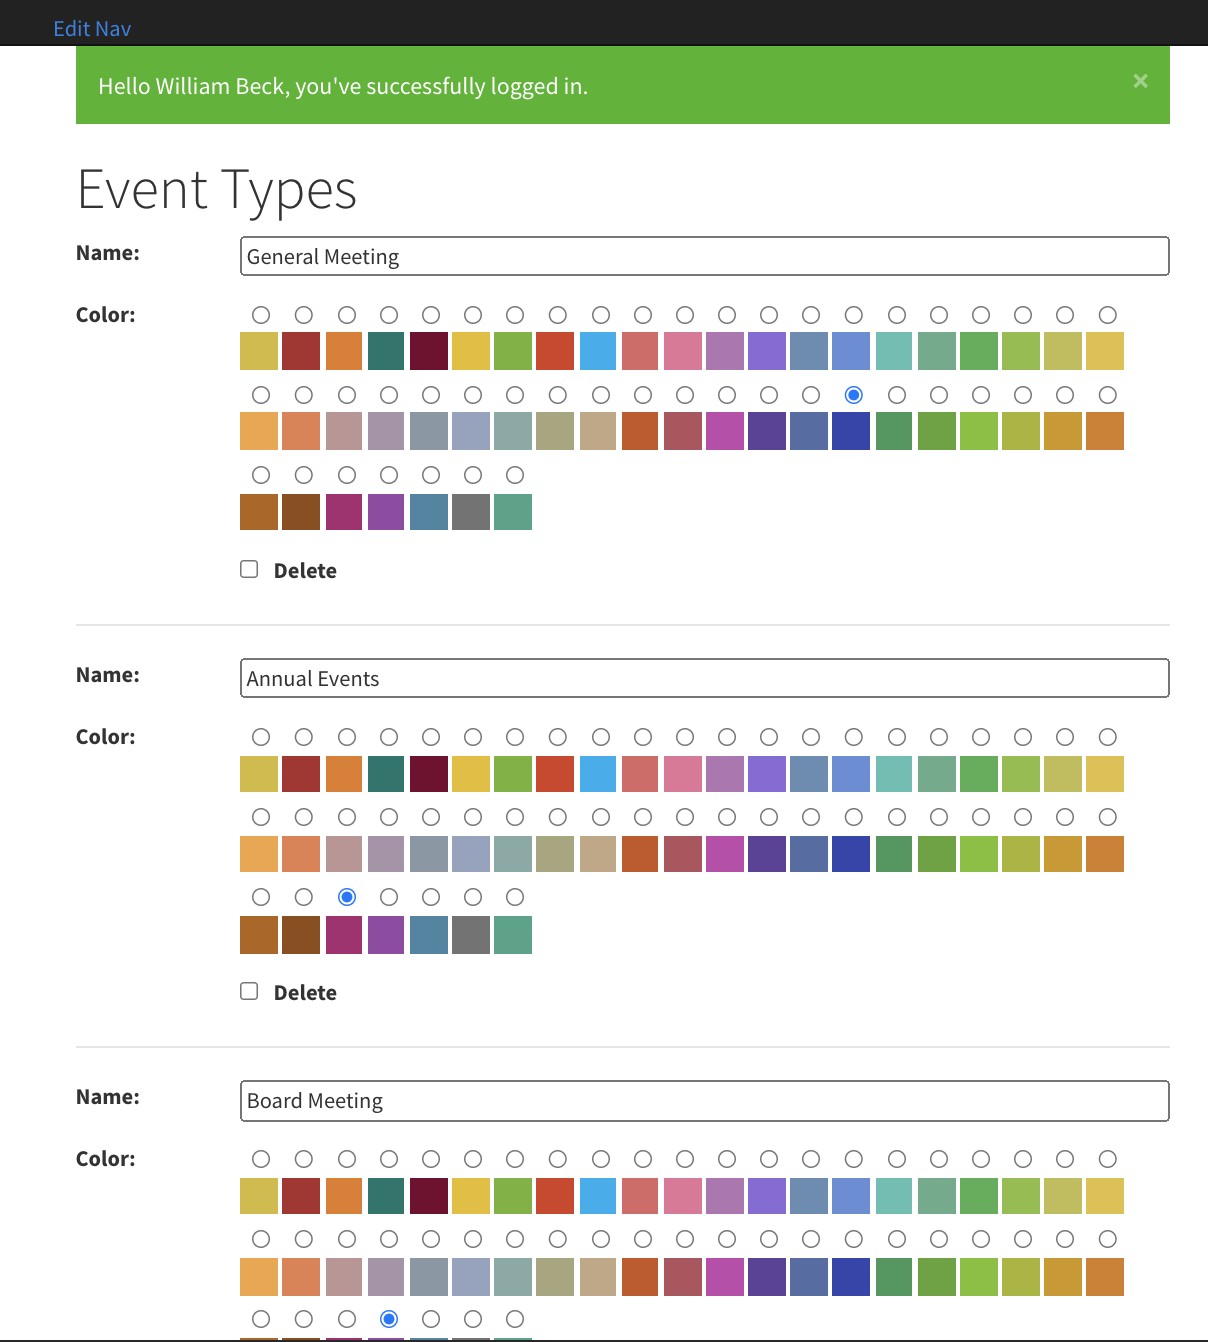 Colorful Online Calendar for your Event Types!